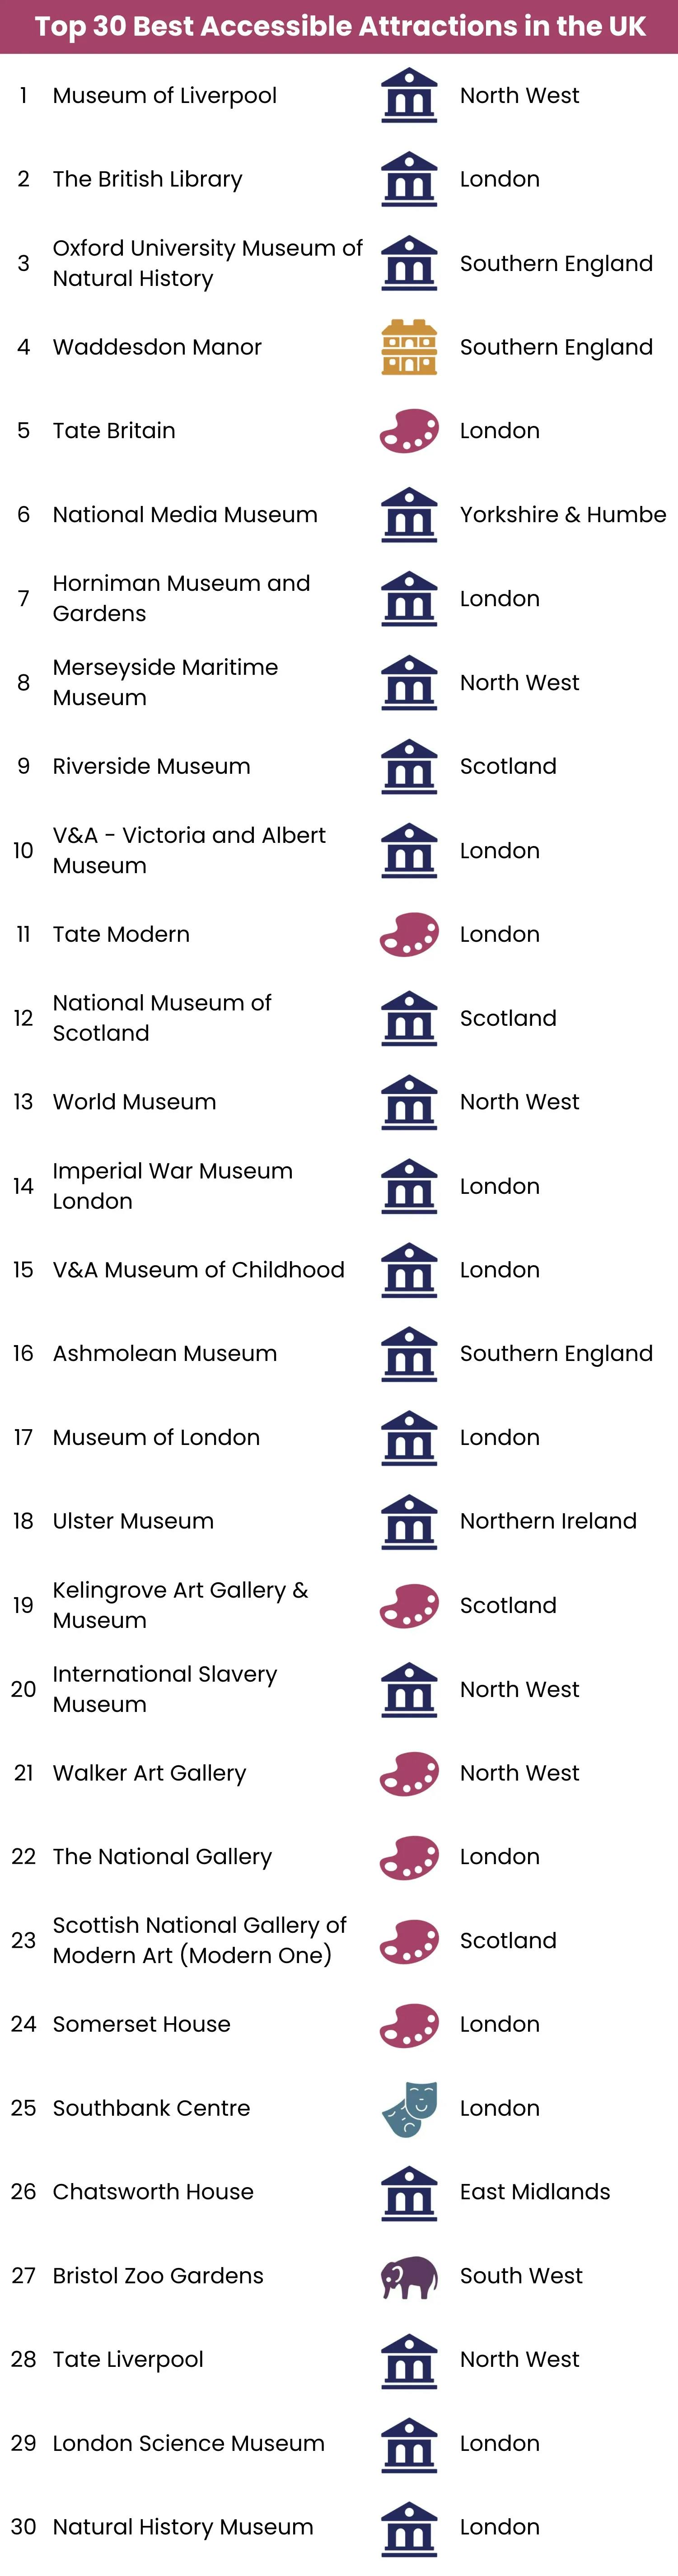 Top 30 Best Accessible Attraction in the UK